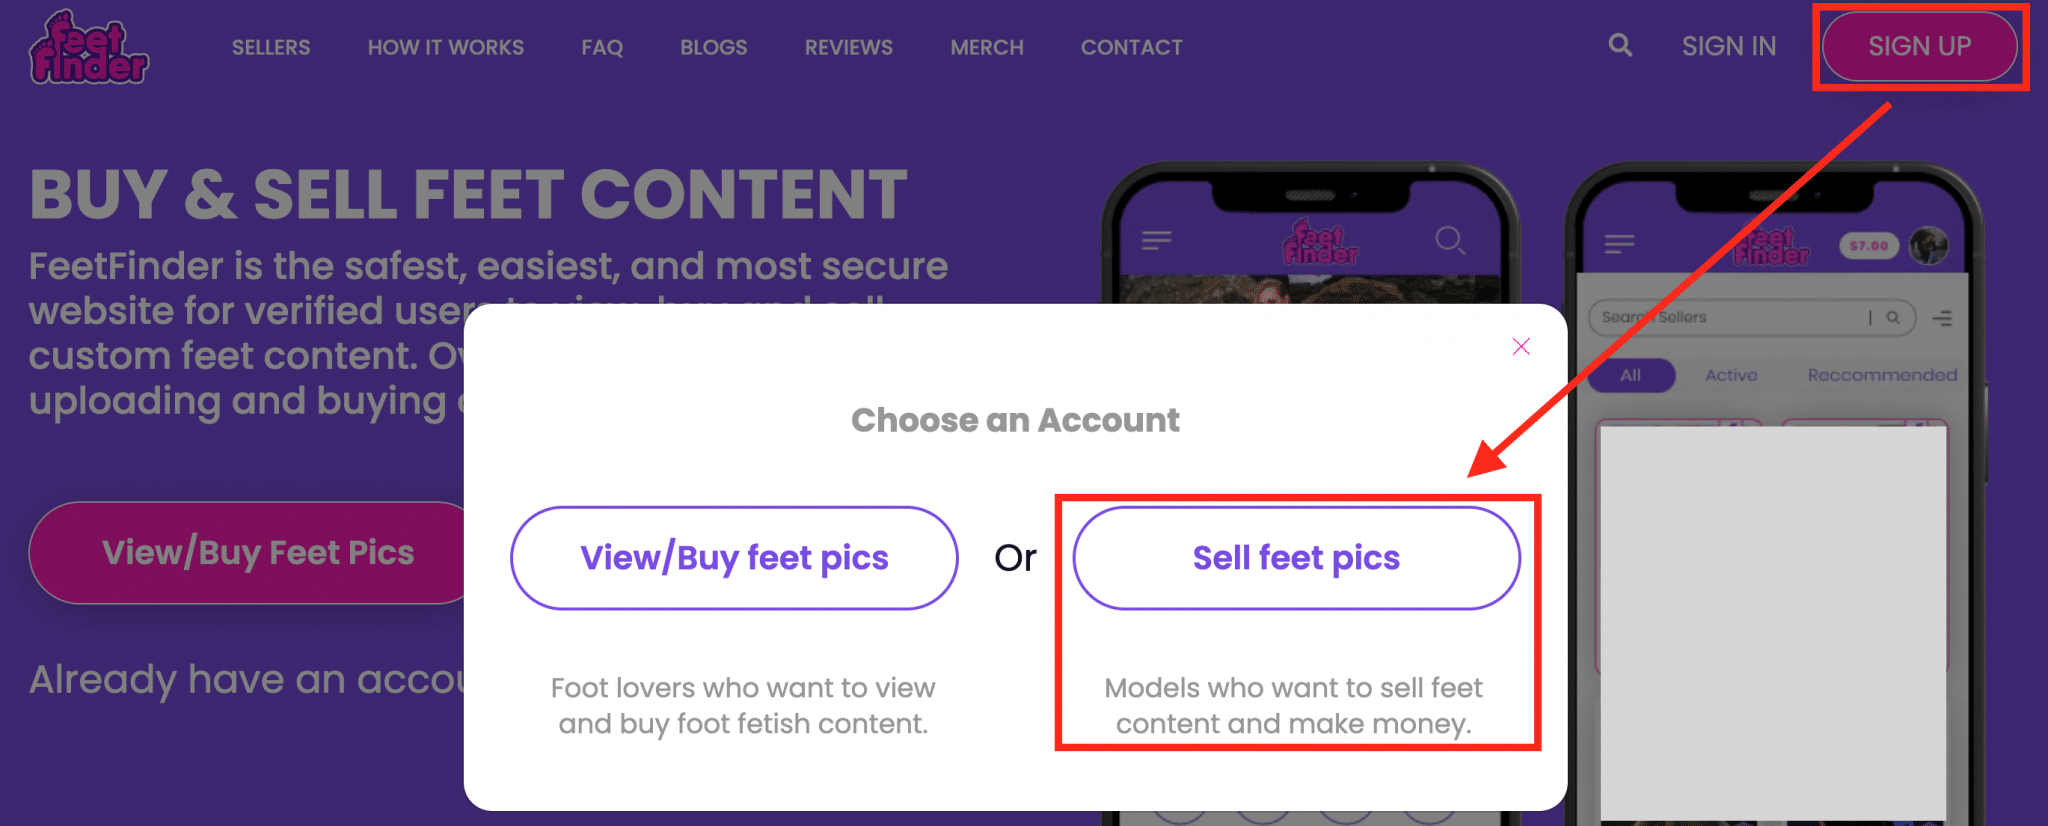 Sign up for FeetFinder to sell photos of feet and make money online